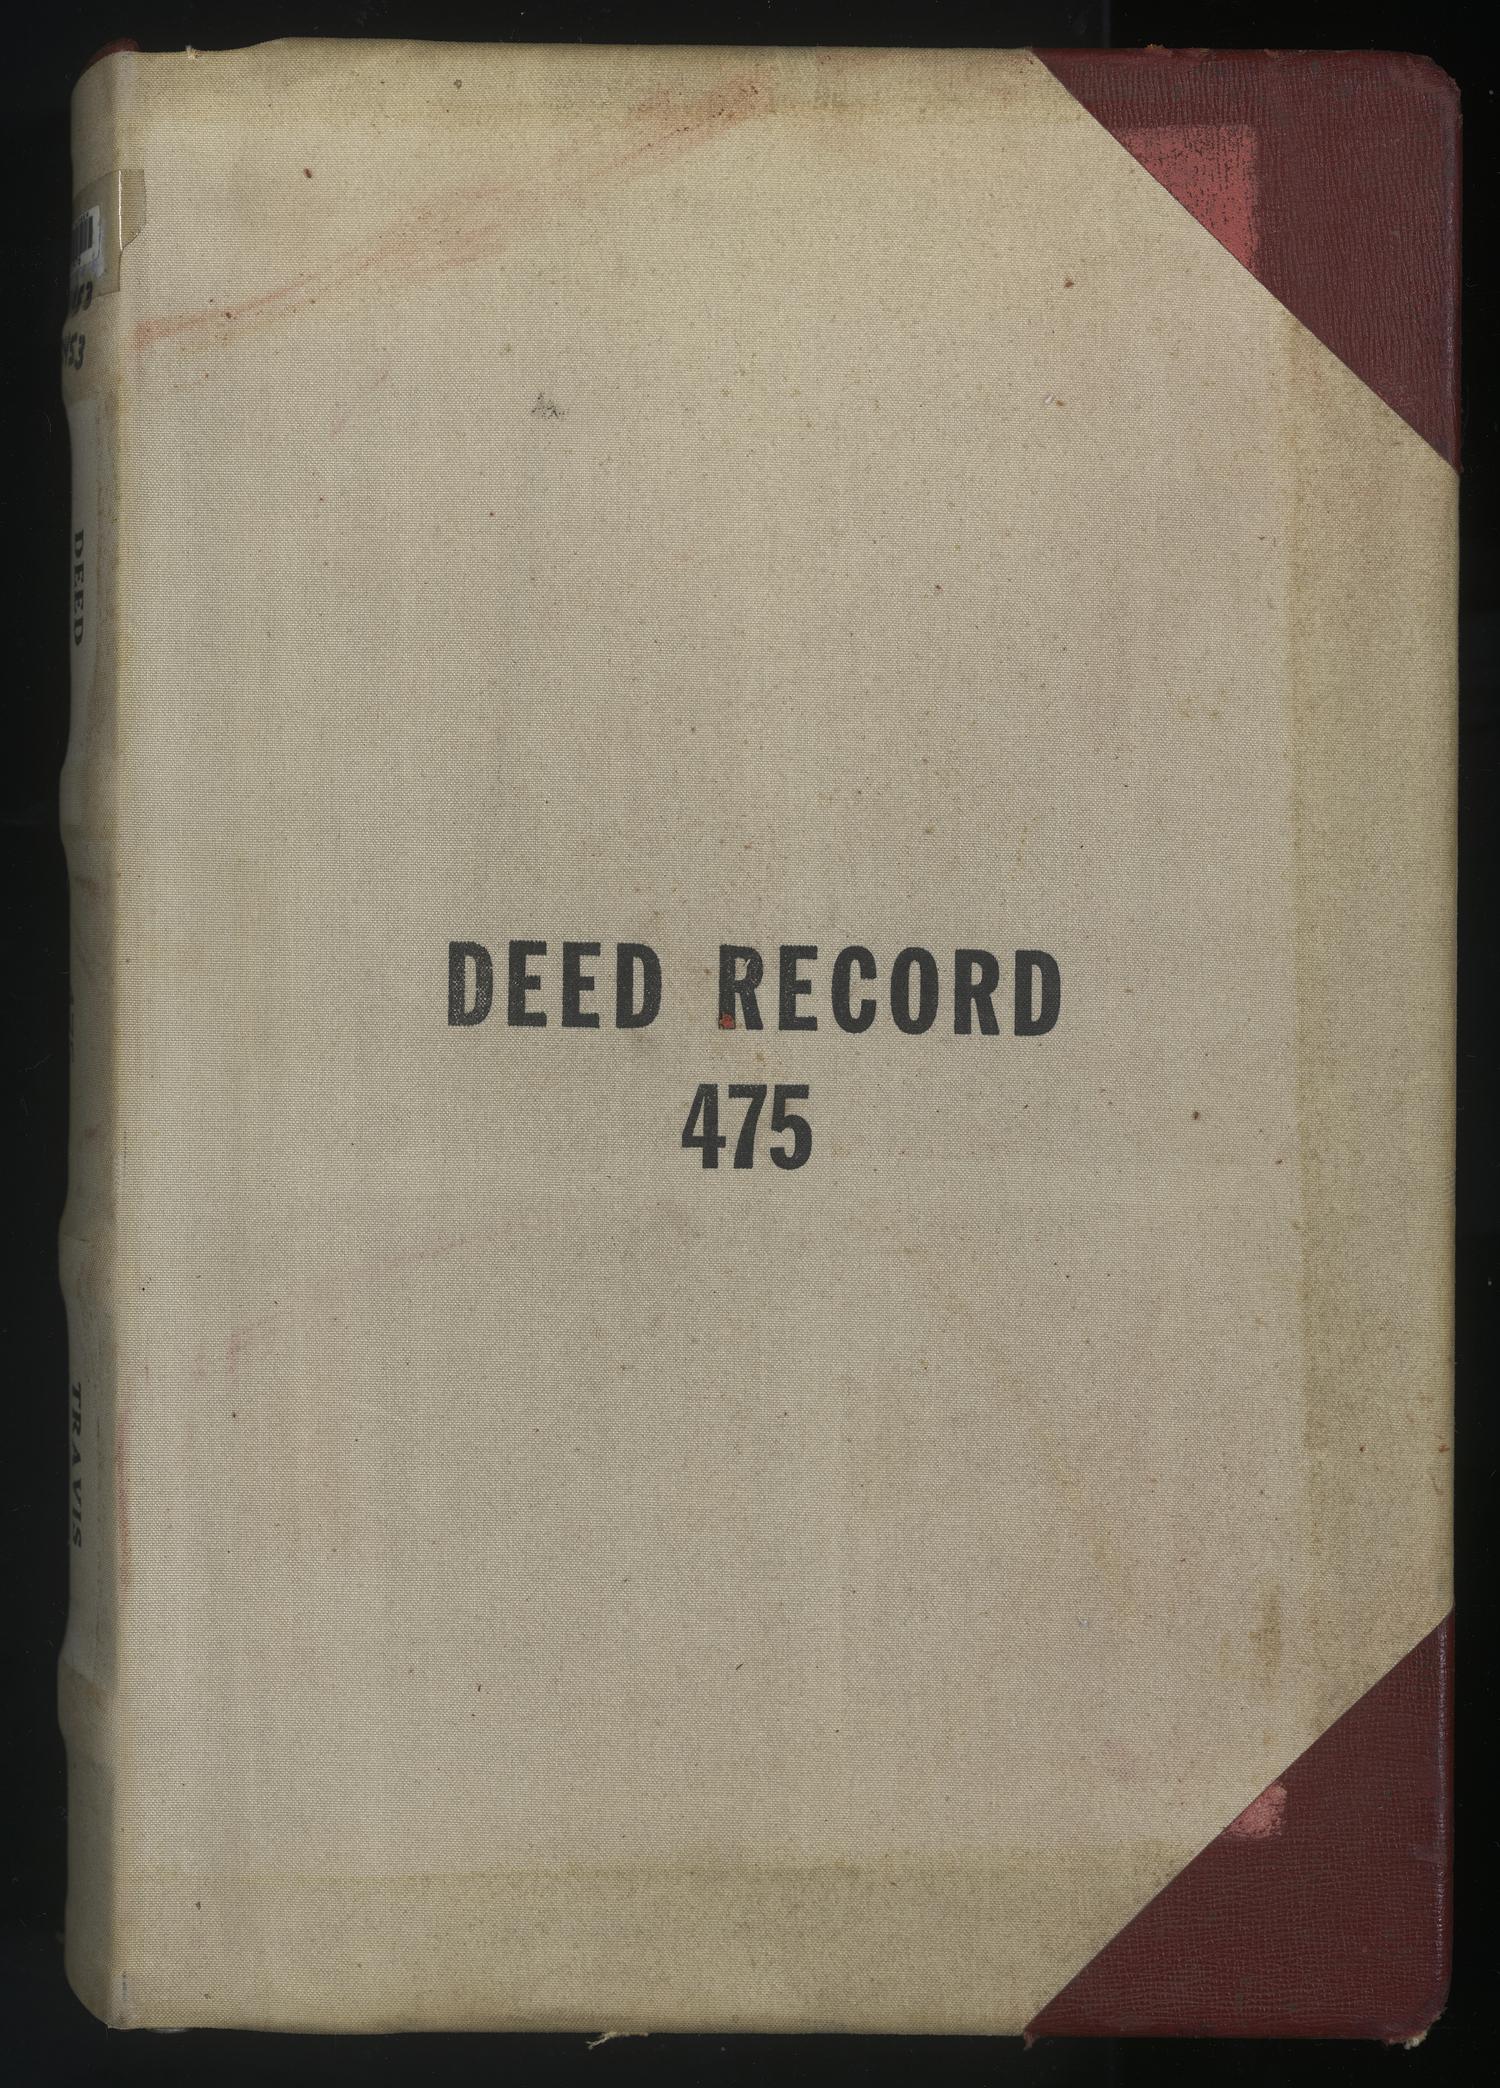 travis-county-deed-records-deed-record-475-the-portal-to-texas-history